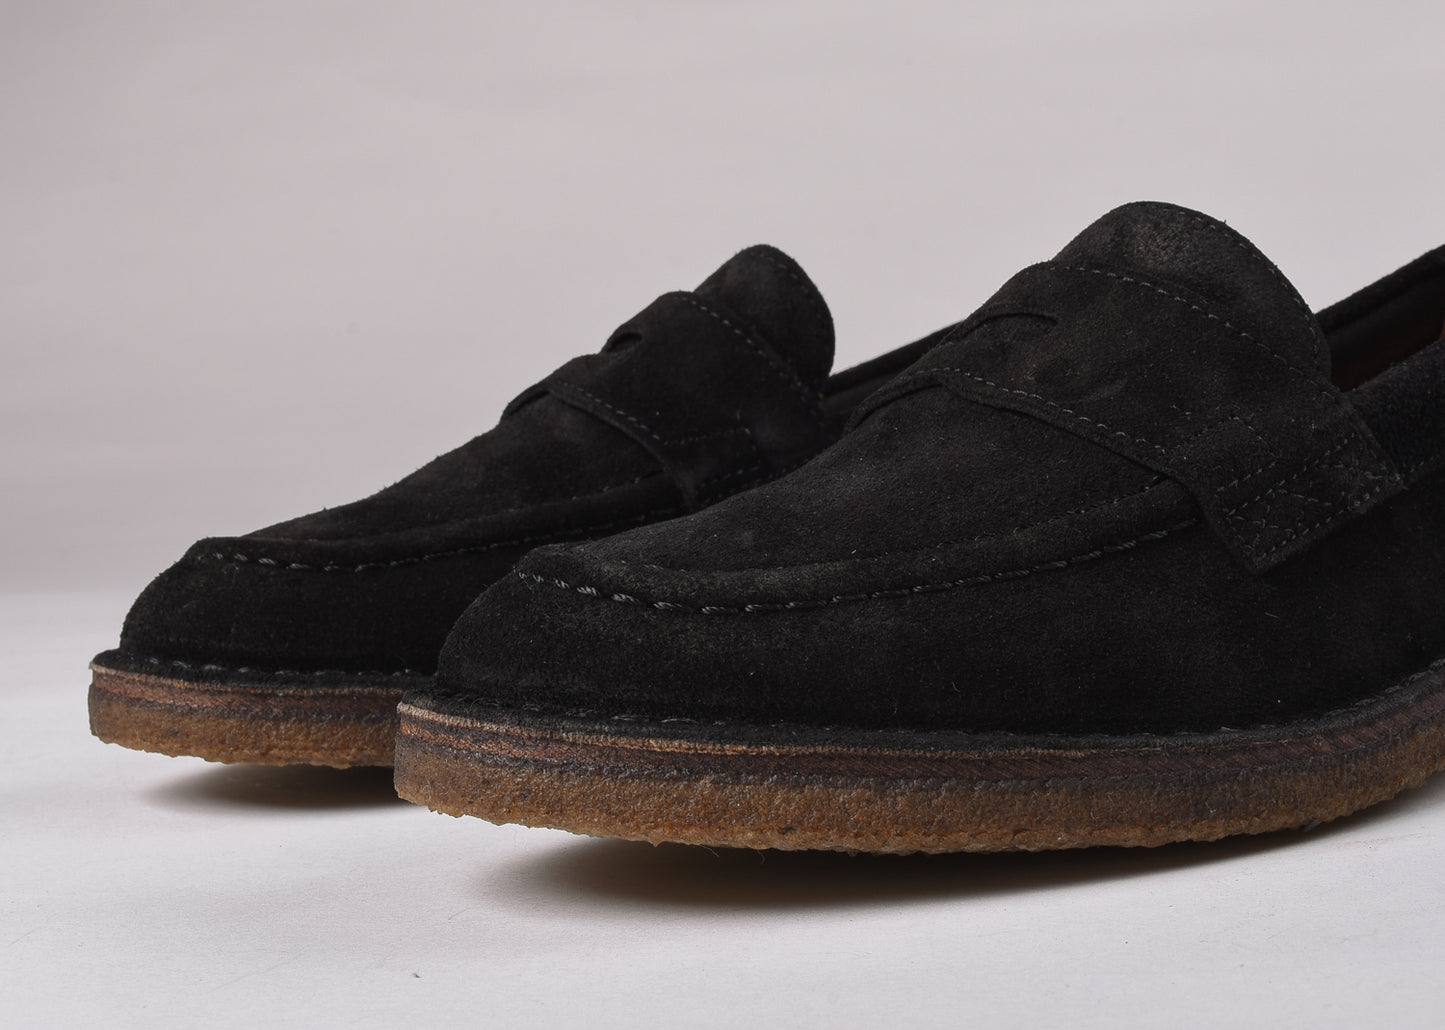 USED DRAKE'S CANAL PENNY LOAFER - BLACK SUEDE